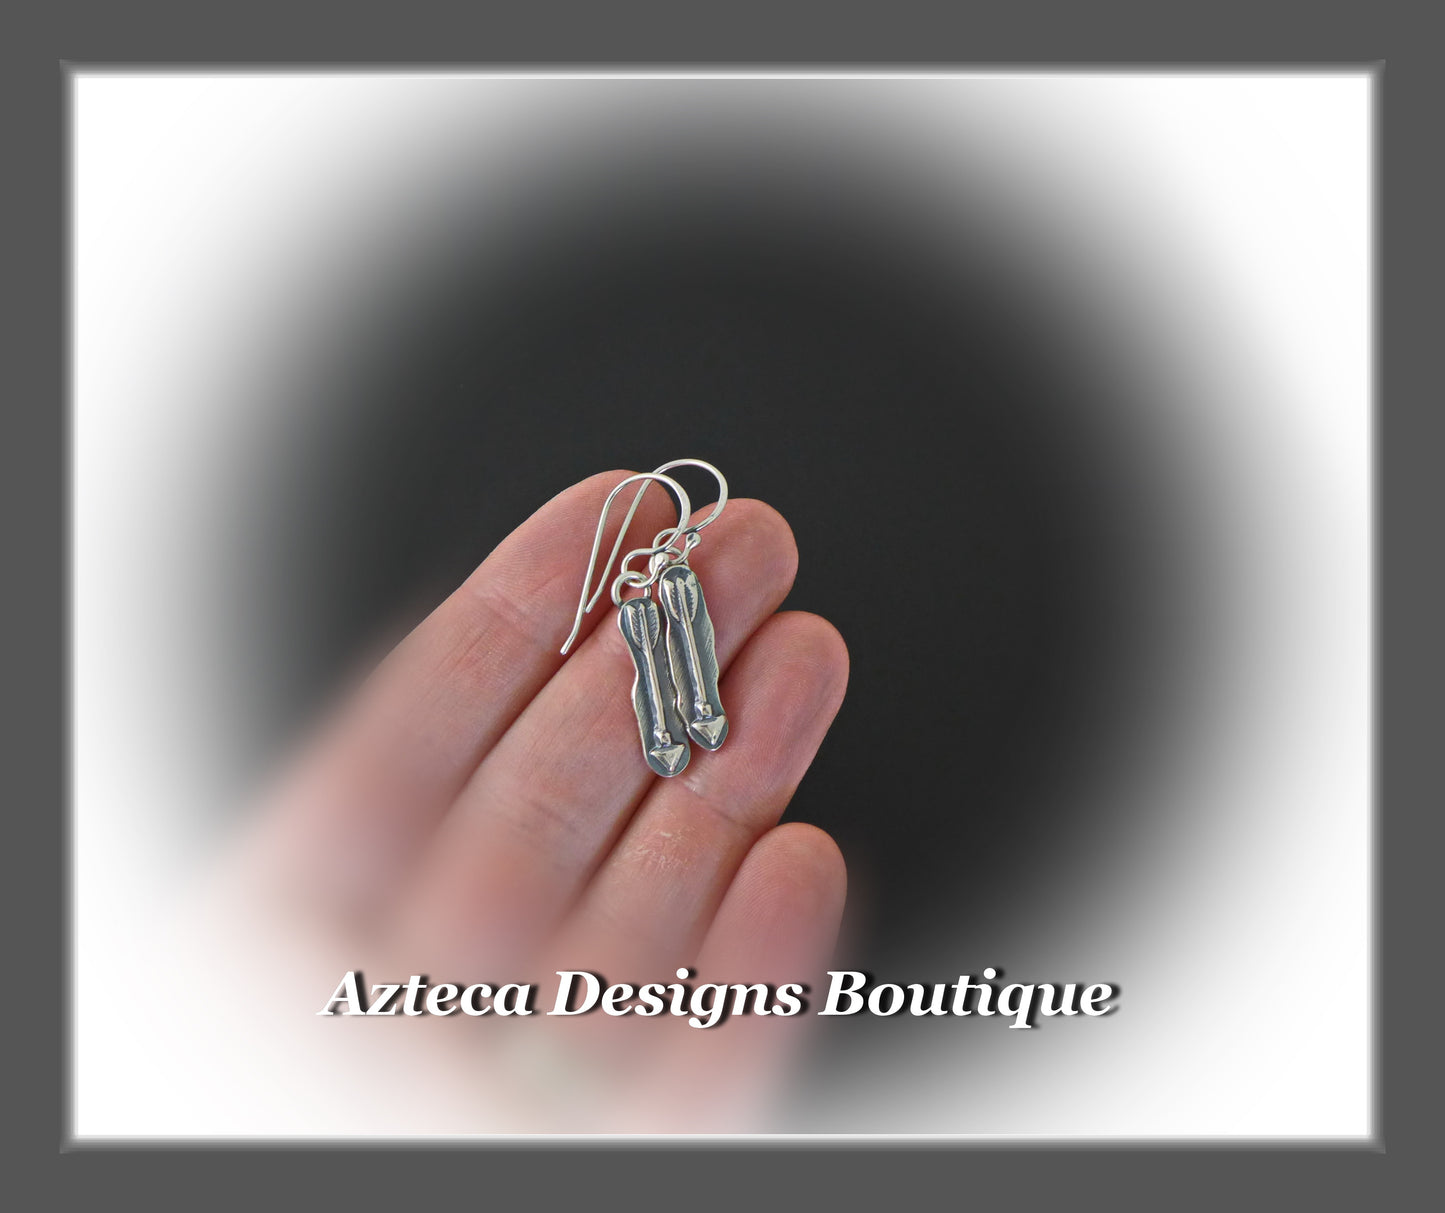 Arrow+Recycled Silver+Hand Fabricated Earrings